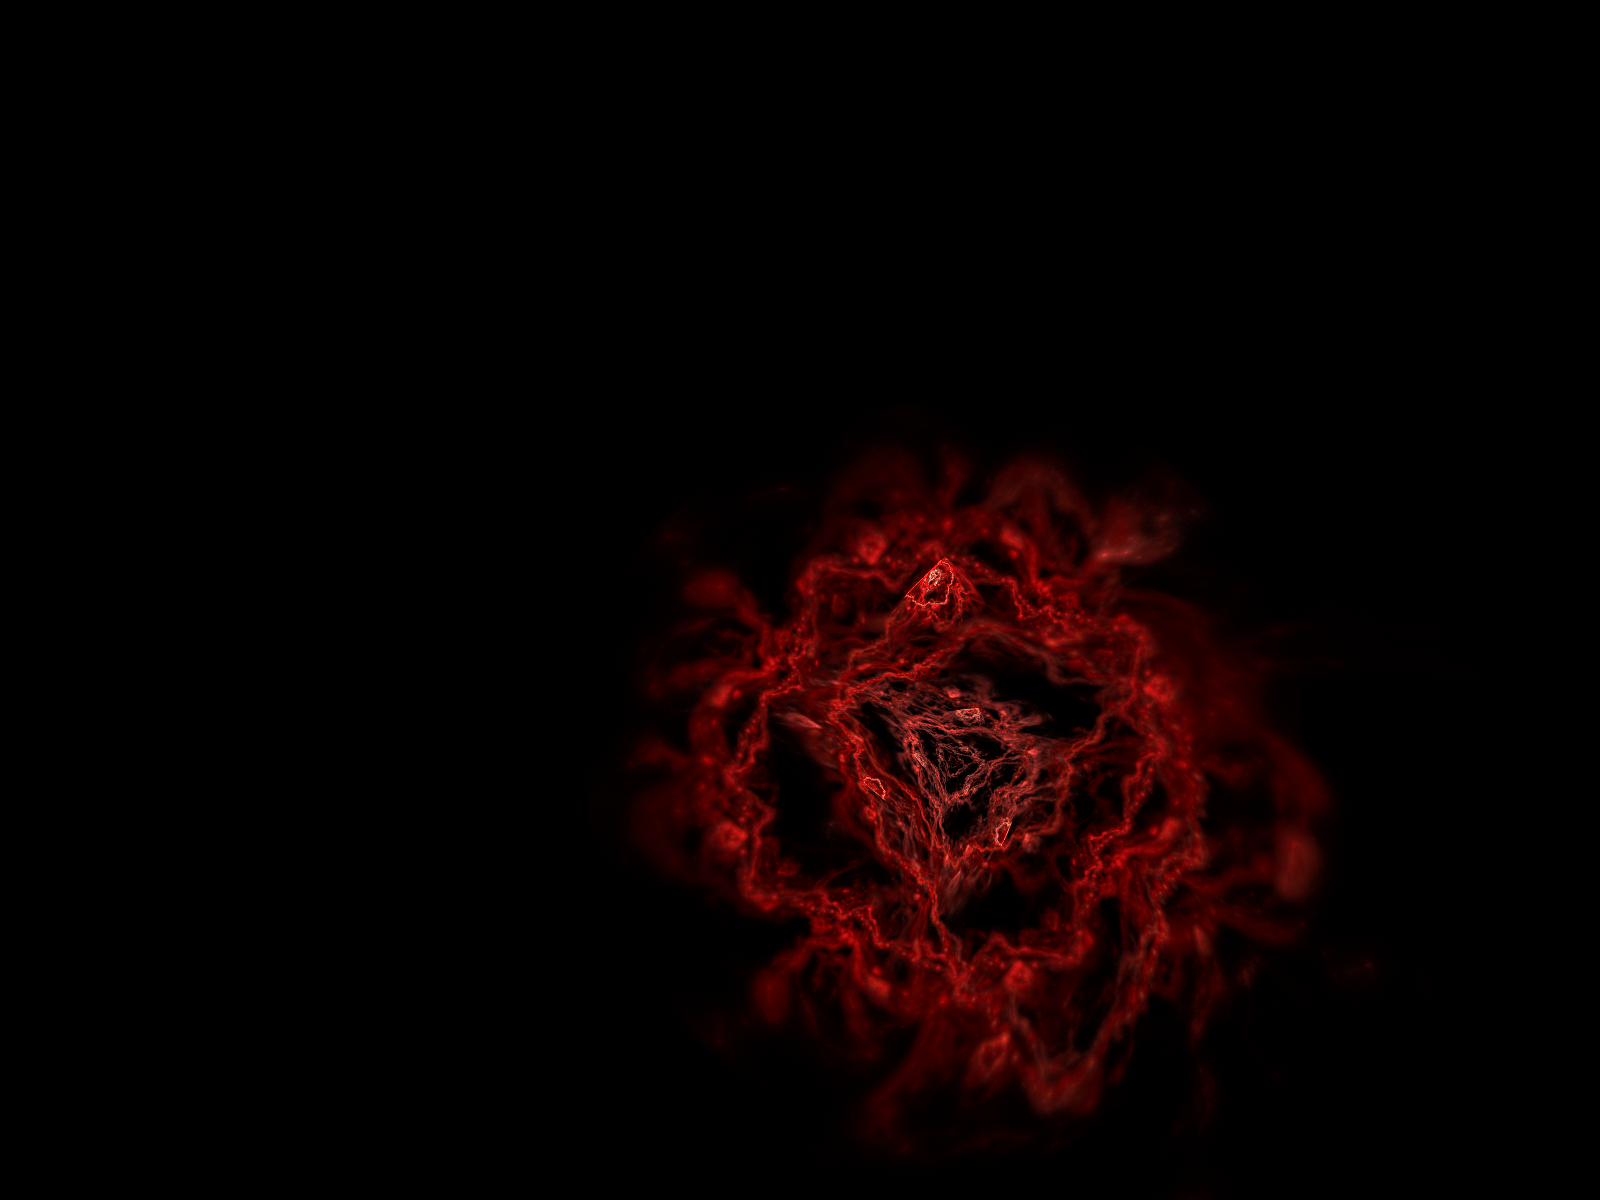 Red Rose With Black Backgrounds